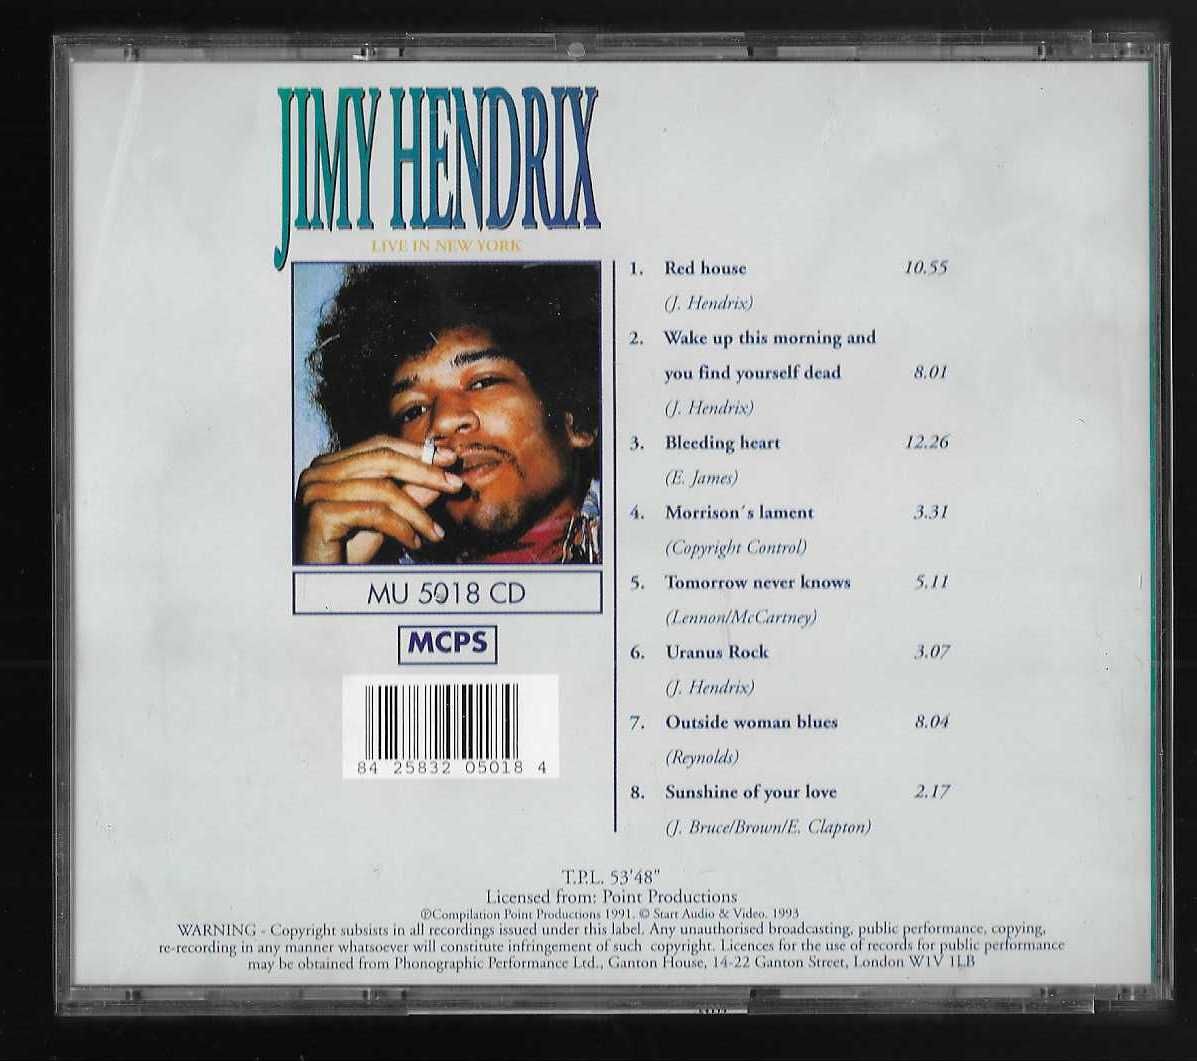 Jimy Hendrix. Live in New York. Woke up this morning...